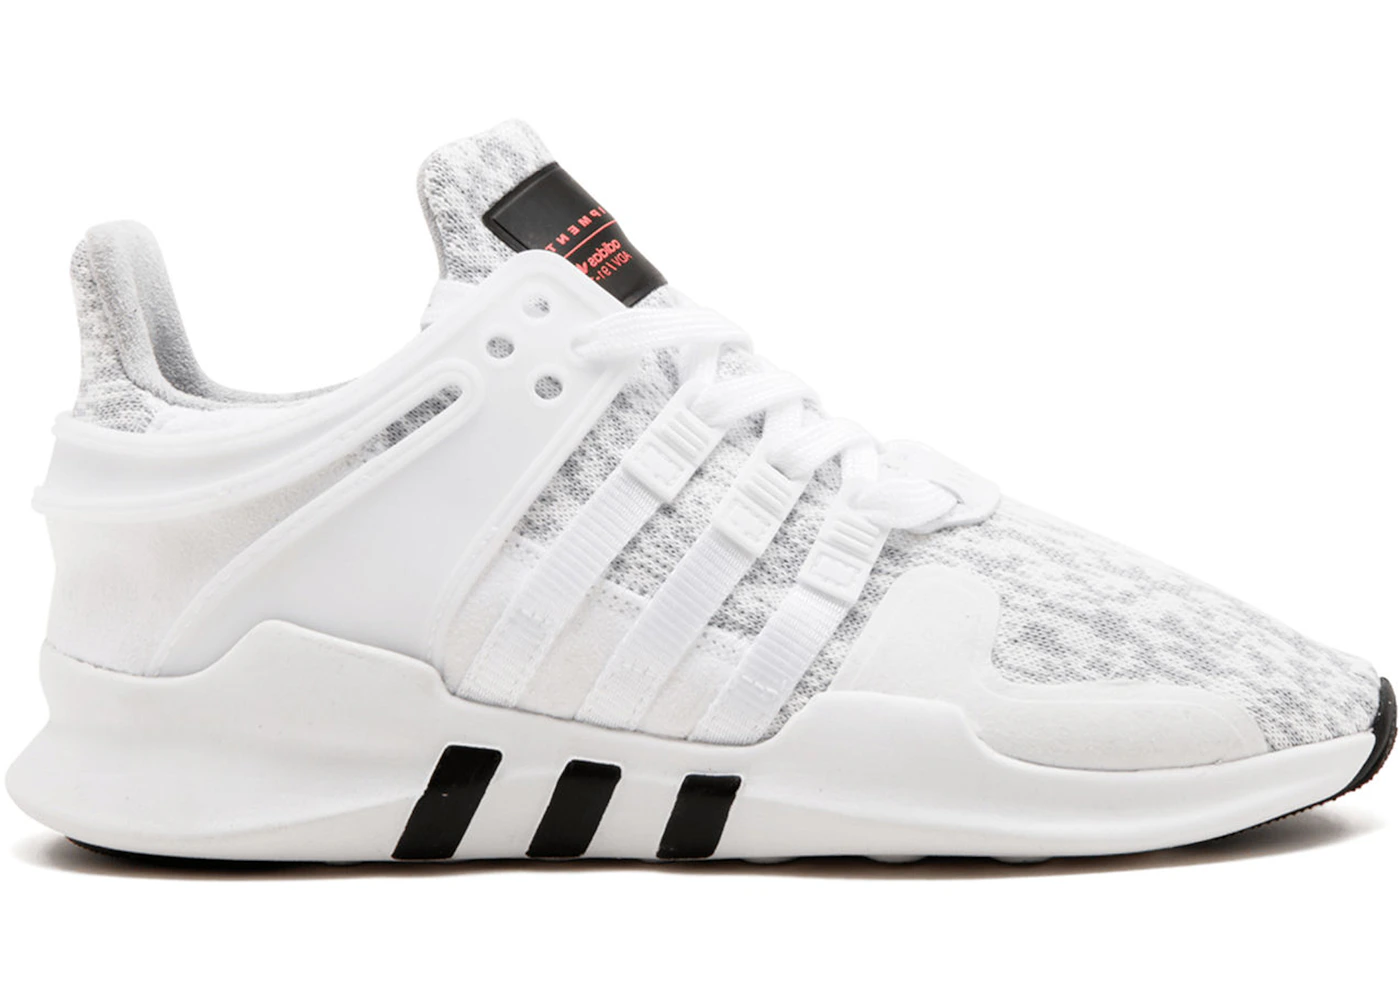 adidas EQT Support Adv Clear Onix White Men's - BB1305 - US